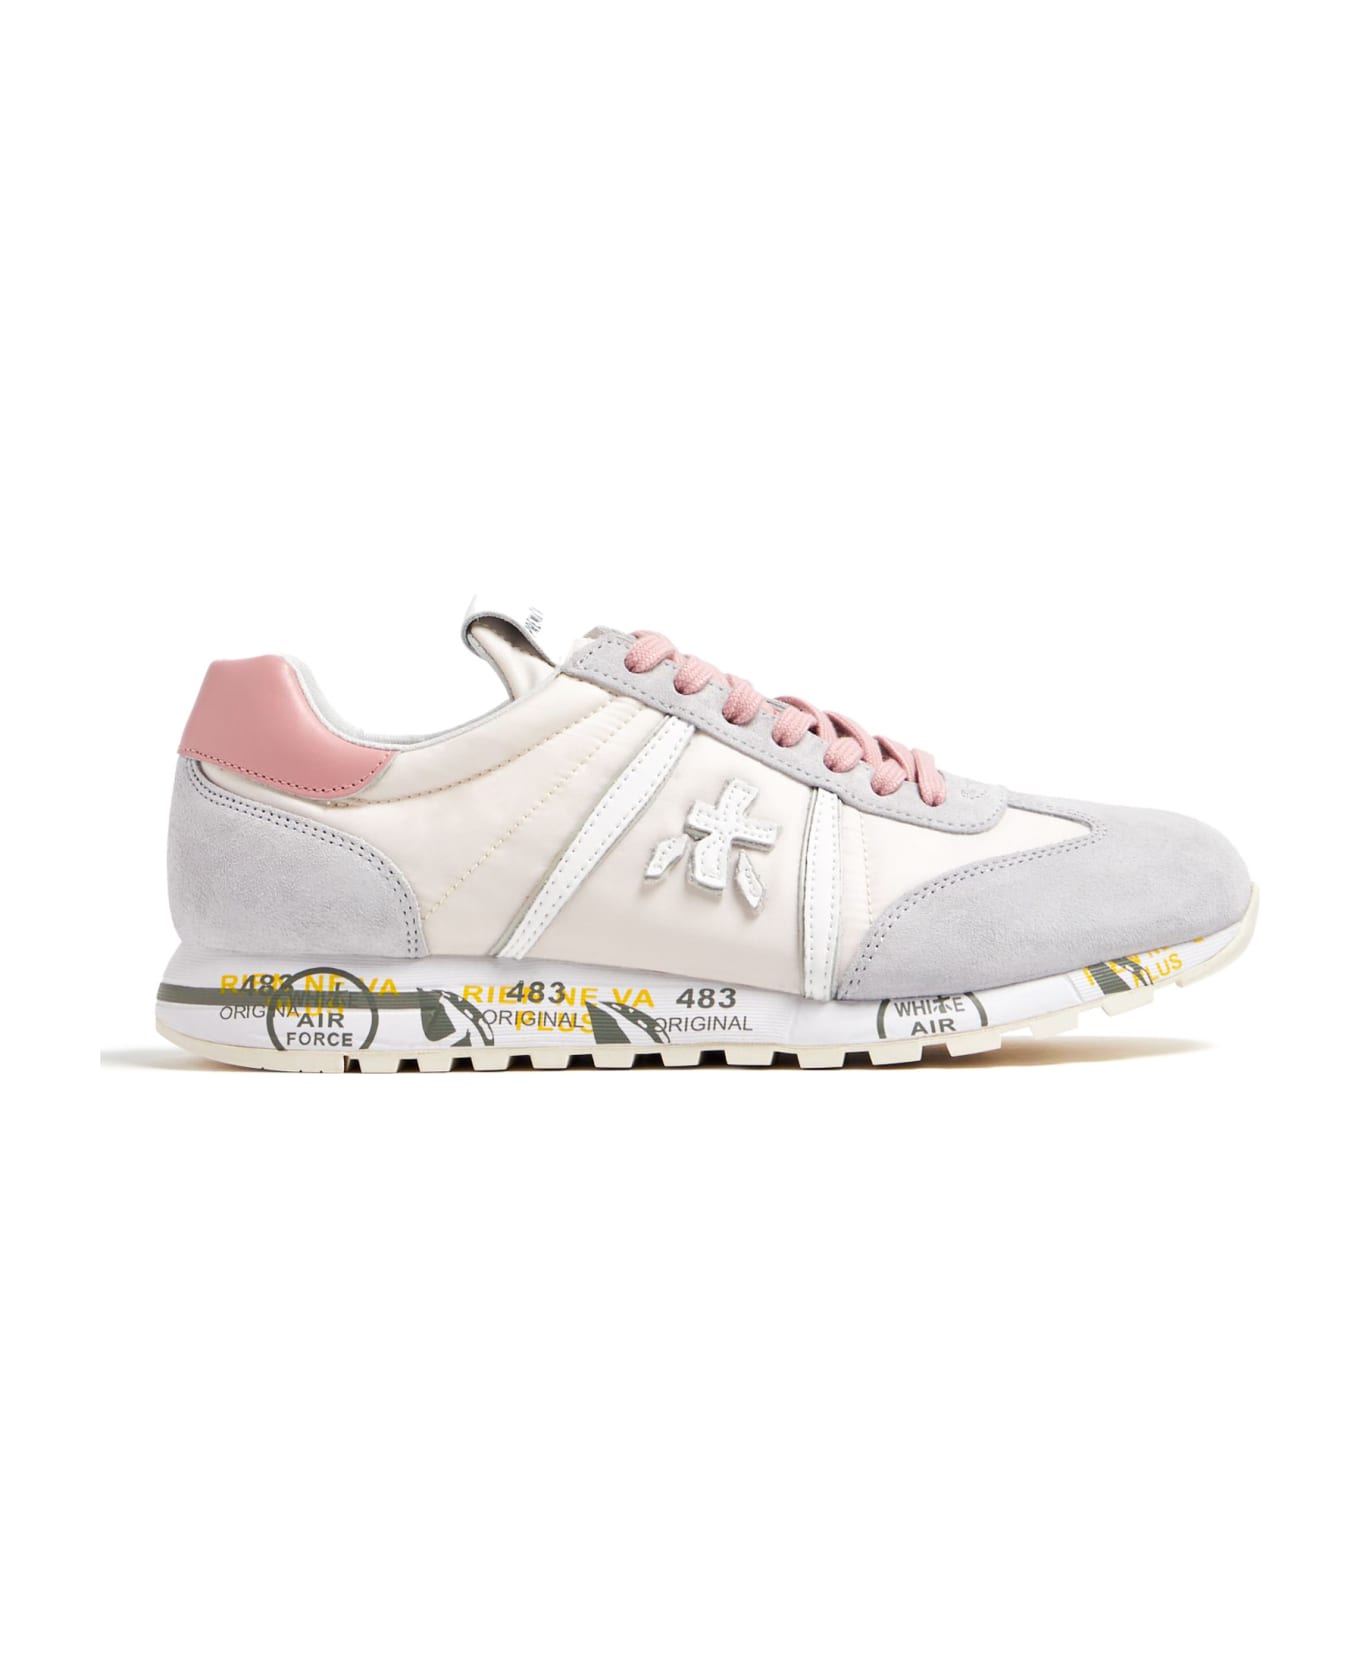 Premiata Grey Suede And Beige Nylon Lucy Sneakers - Grey スニーカー